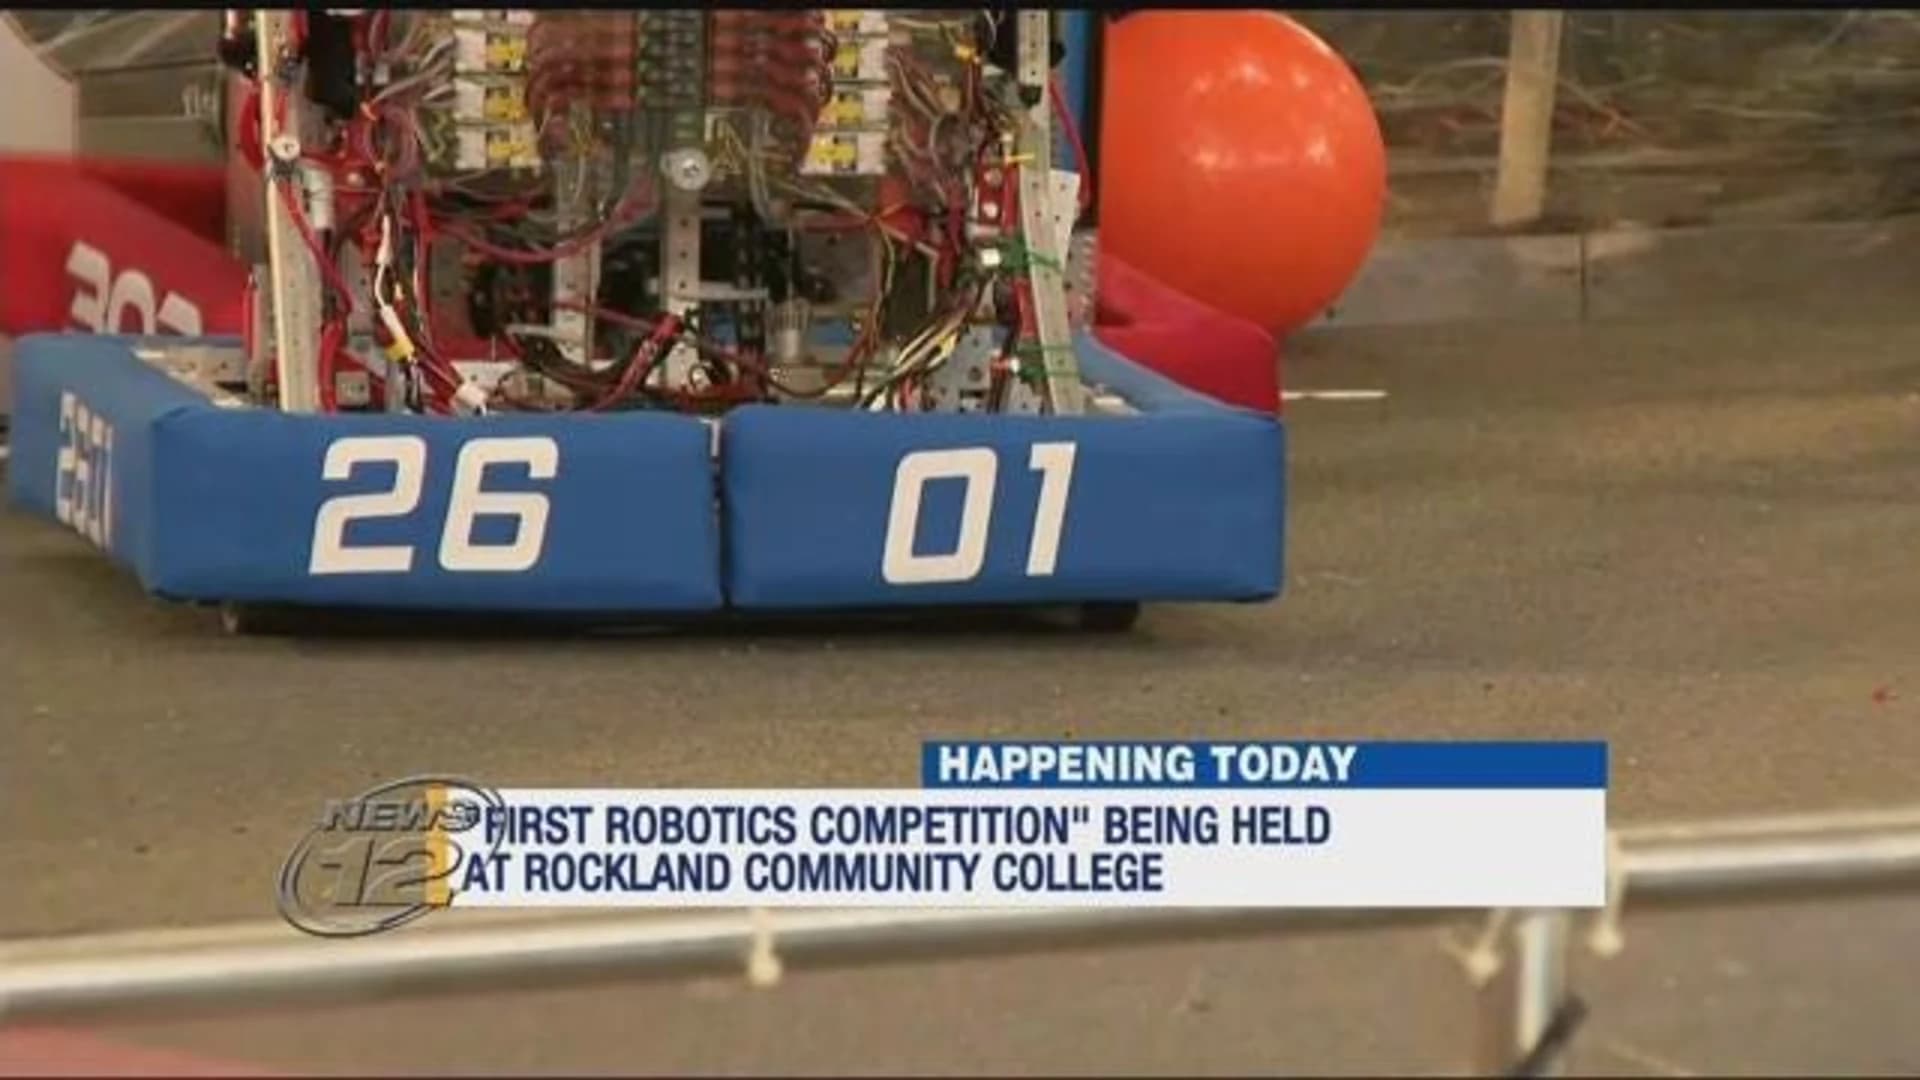 3rd annual global robotics championship kicks off in Rockland County